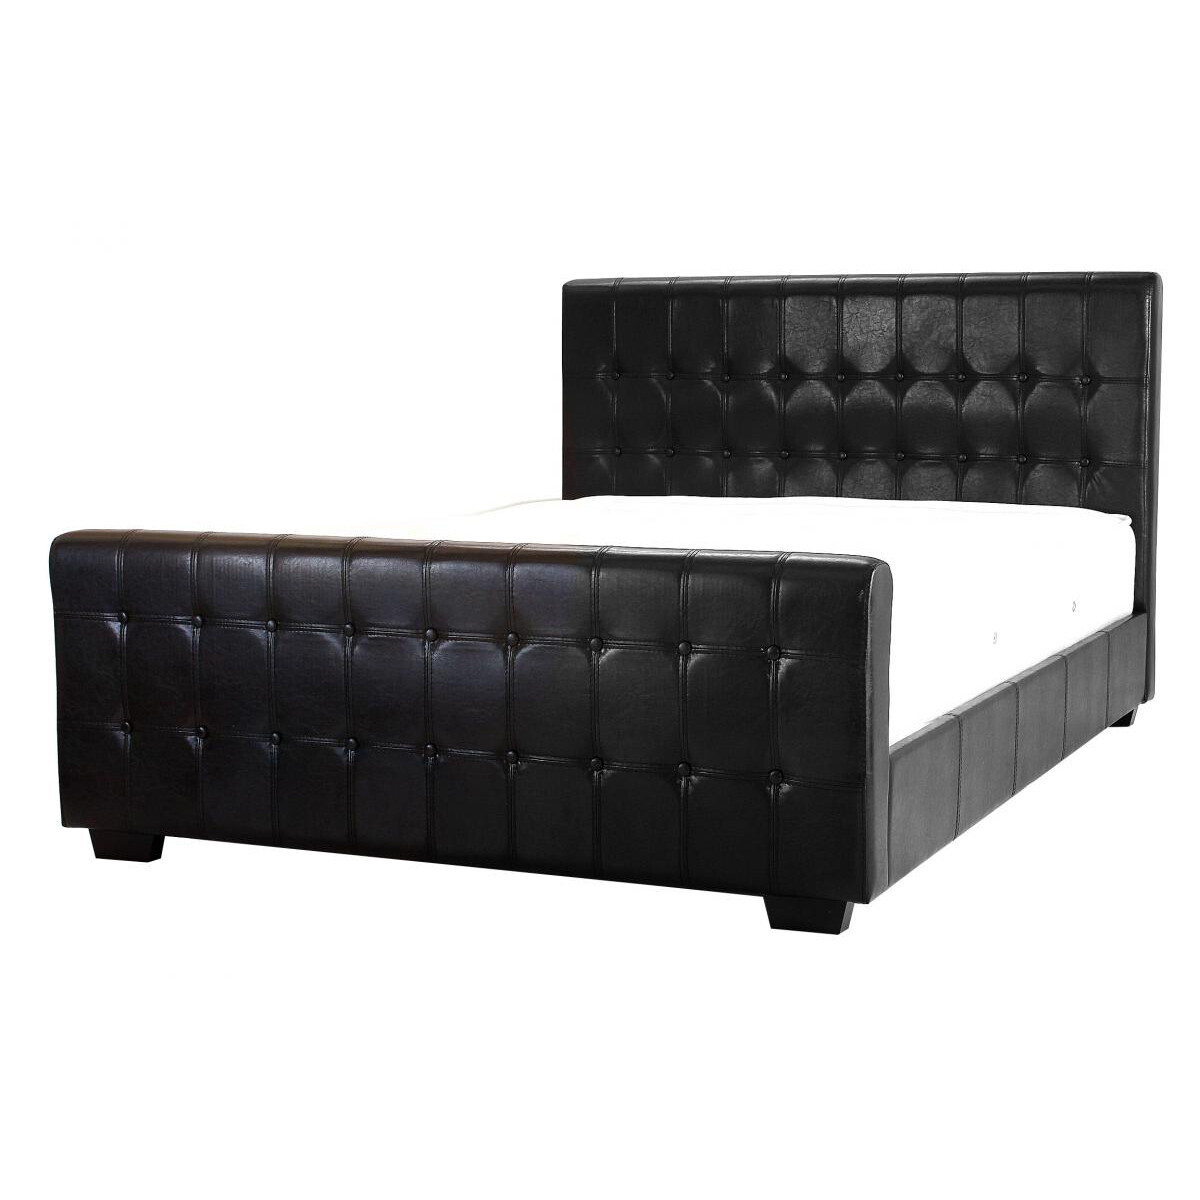 Daker double leather bed